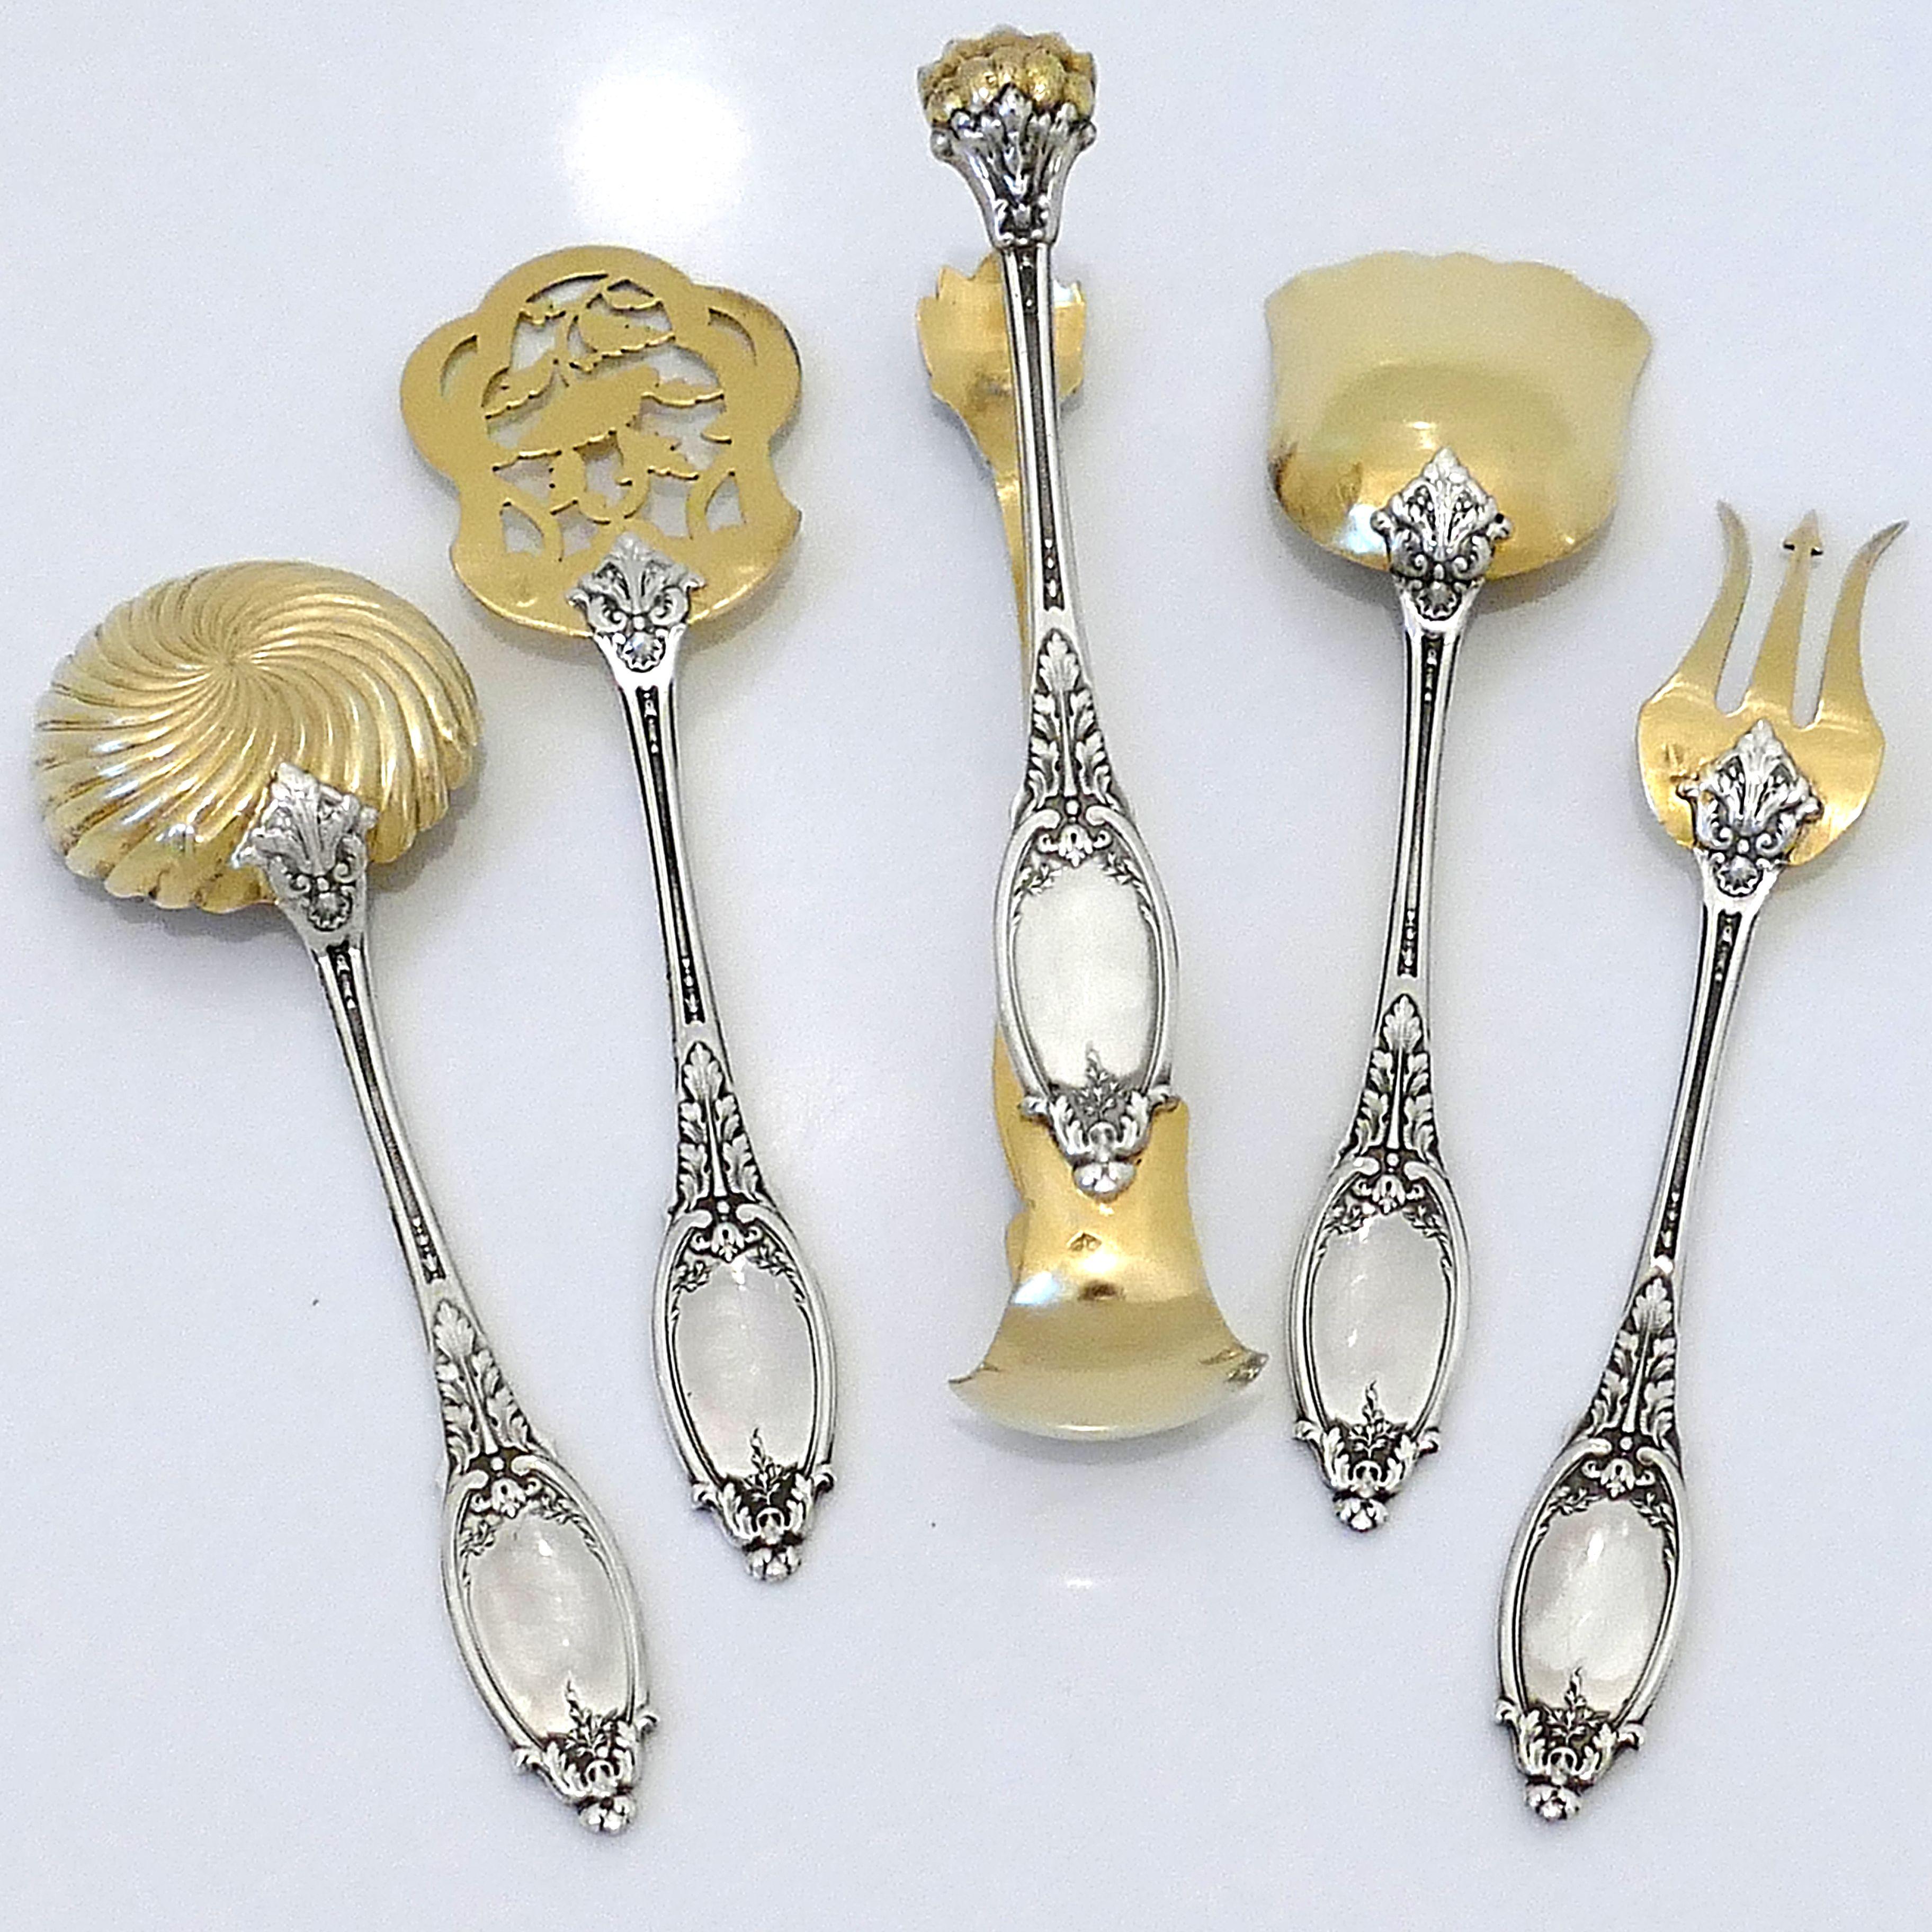 Neoclassical Maillard French All Sterling Silver 18-Karat Gold Hors D'oeuvre Dessert 5 Pc Box For Sale